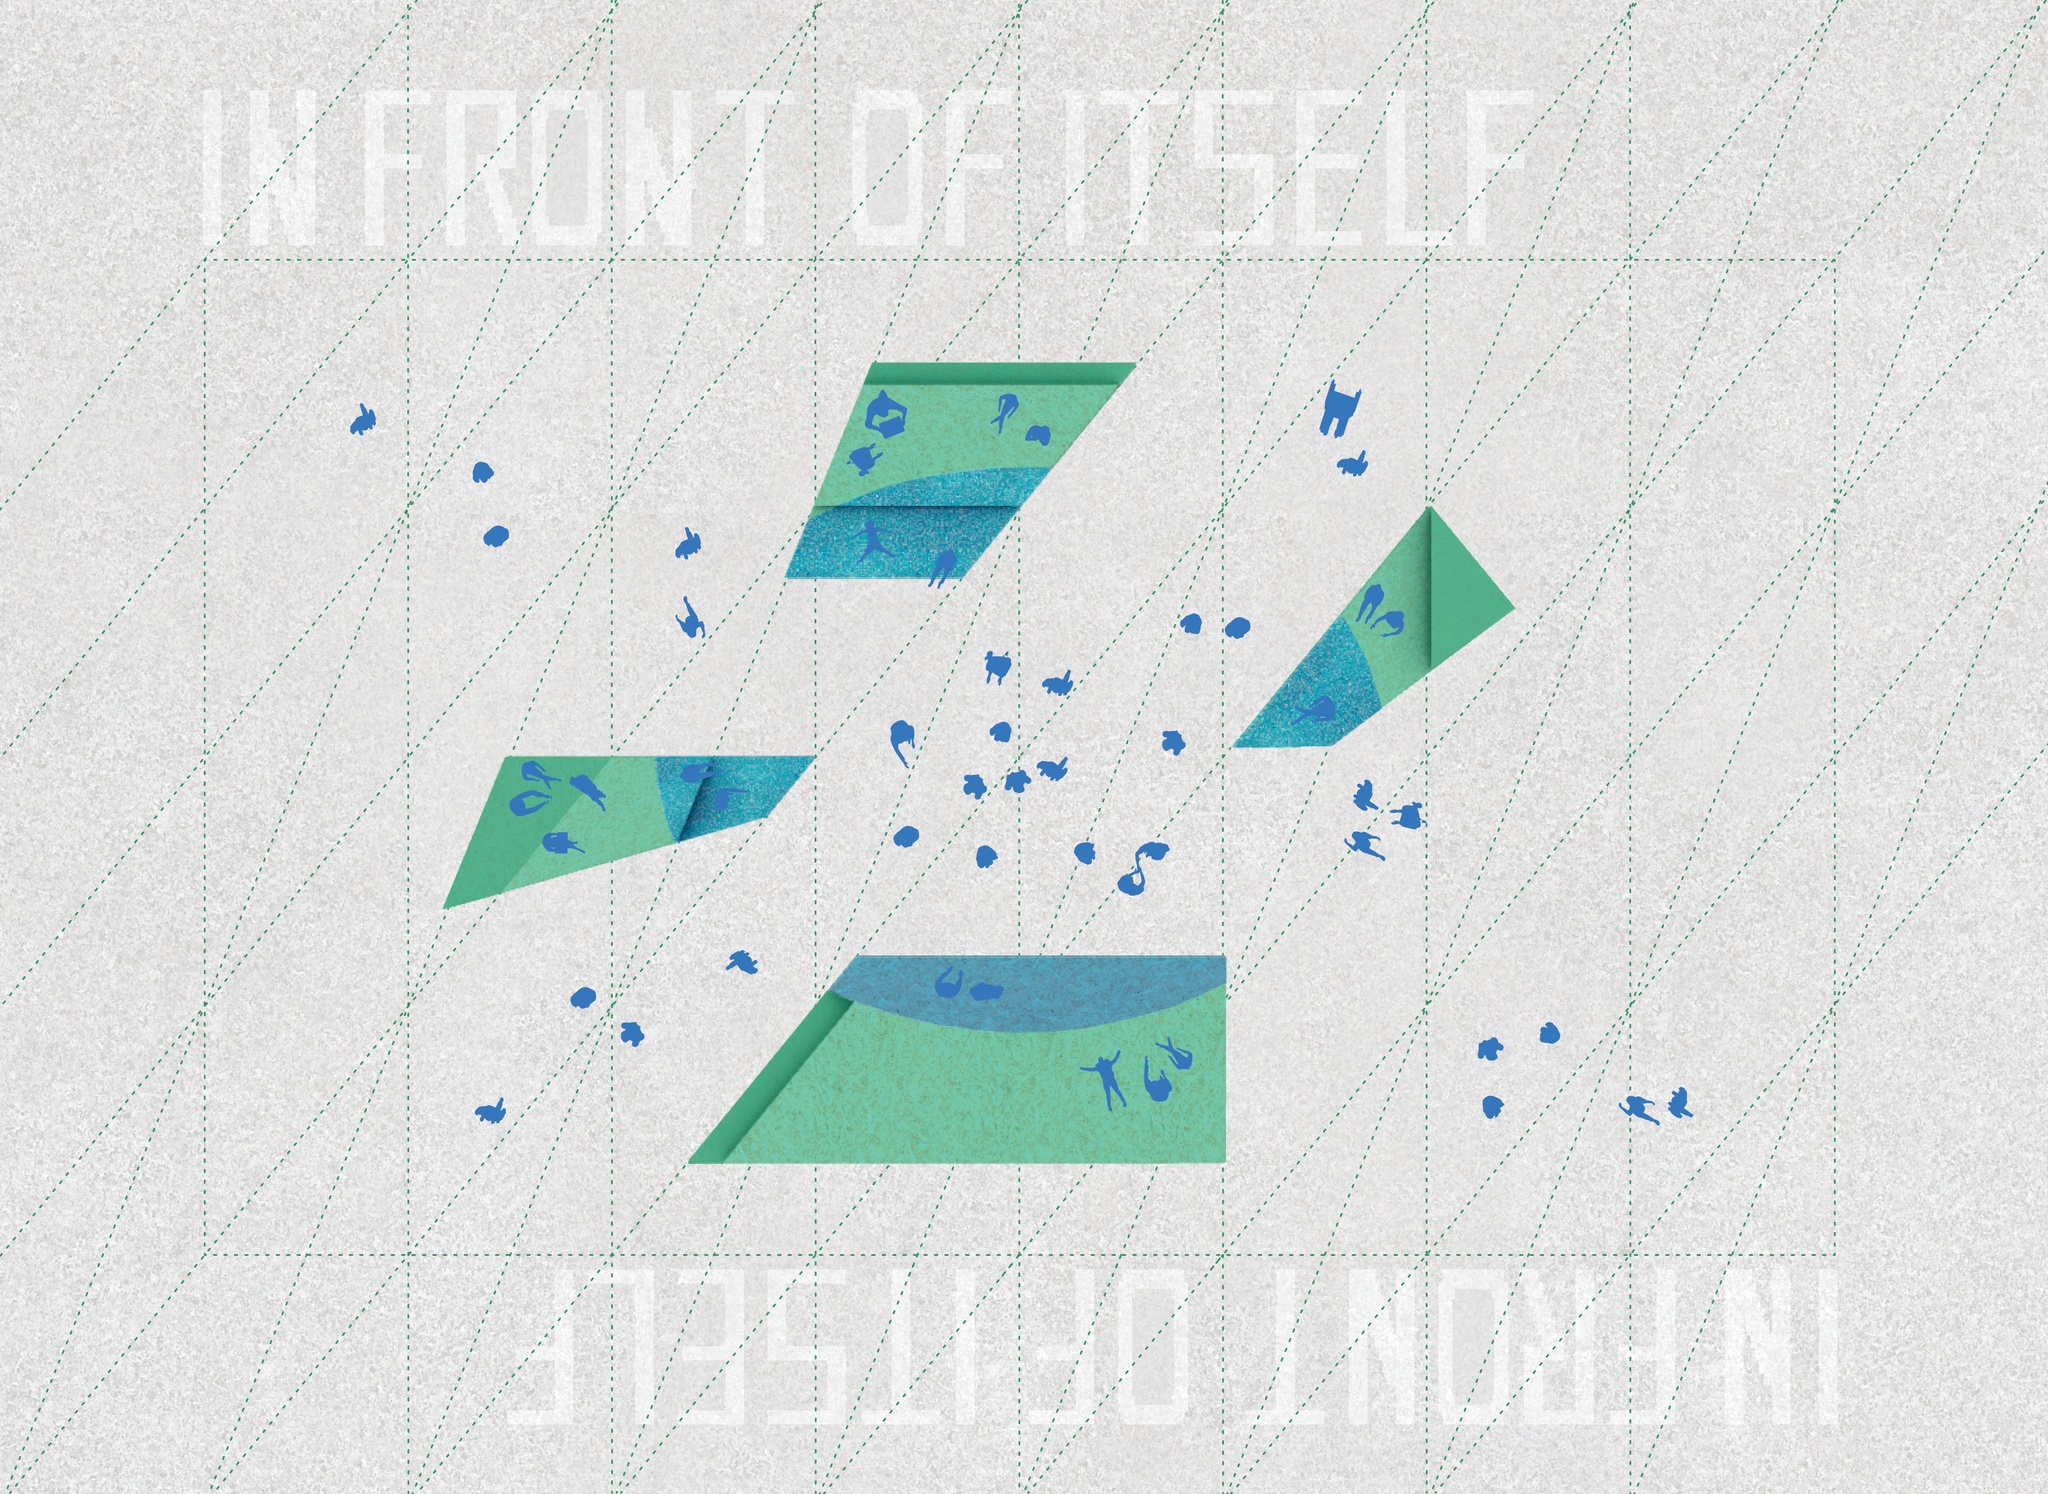 A schematic diagram of The Shed's Plaza as seen from above for Summer Sway. Angular blue-green shapes represent the sculptural installation Tidal Shift. At the top and bottom of the diagram are the words In Front of Itself. They are a permanent artwork by Lawrence Weiner set in the Plaza's paving stones. 